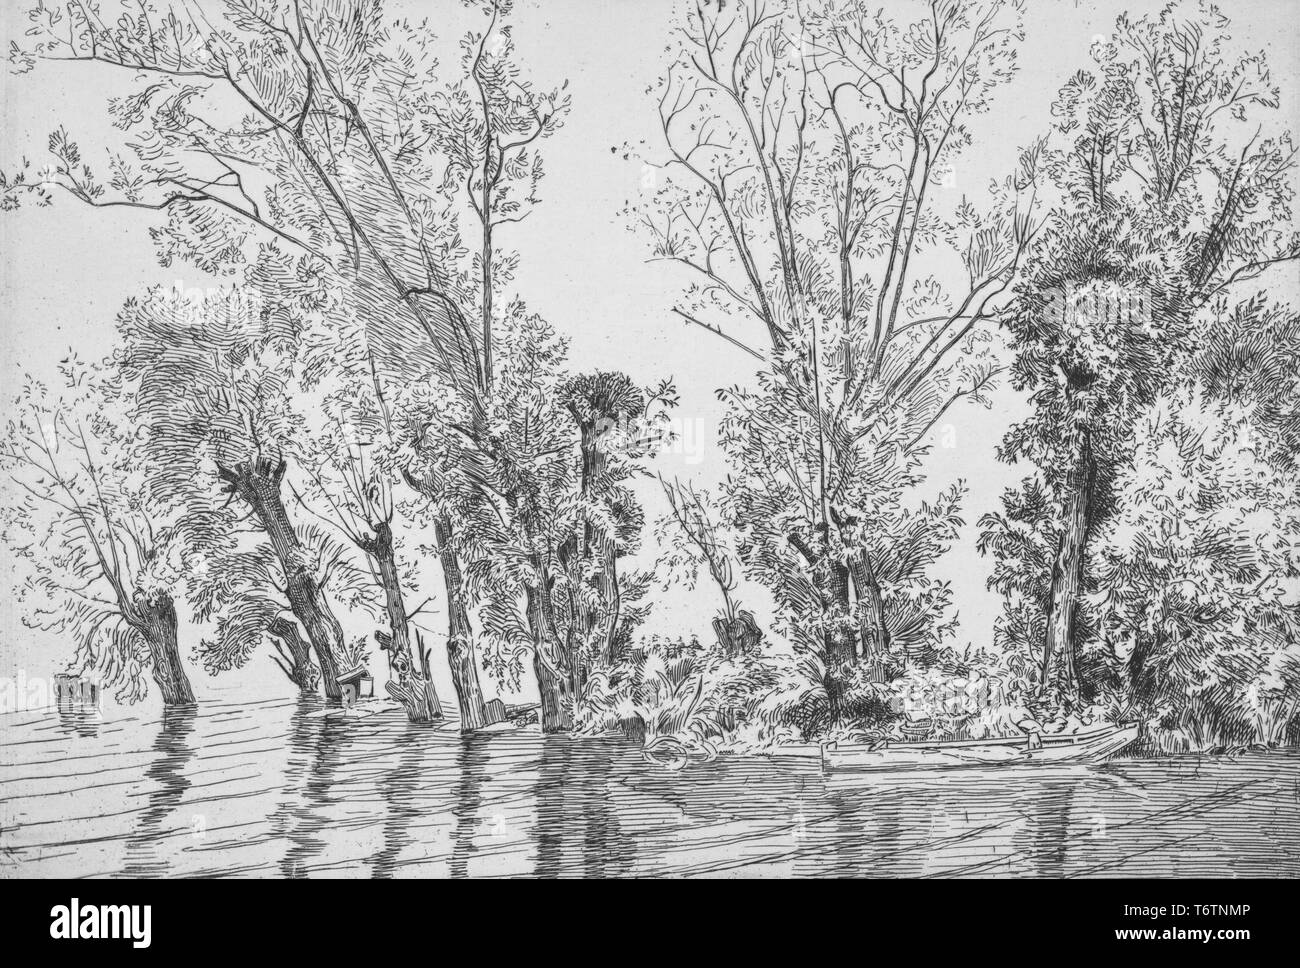 Black and white etching depicting a riverscape with a small boat moored in the right foreground, and sparsely foliated willow trees lining the bank in the background; titled 'Les saules des Mottiaux' (Willows of Mottiaux); numbered and signed, by the illustrator Felix Bracquemond, 1867. From the New York Public Library. () Stock Photo